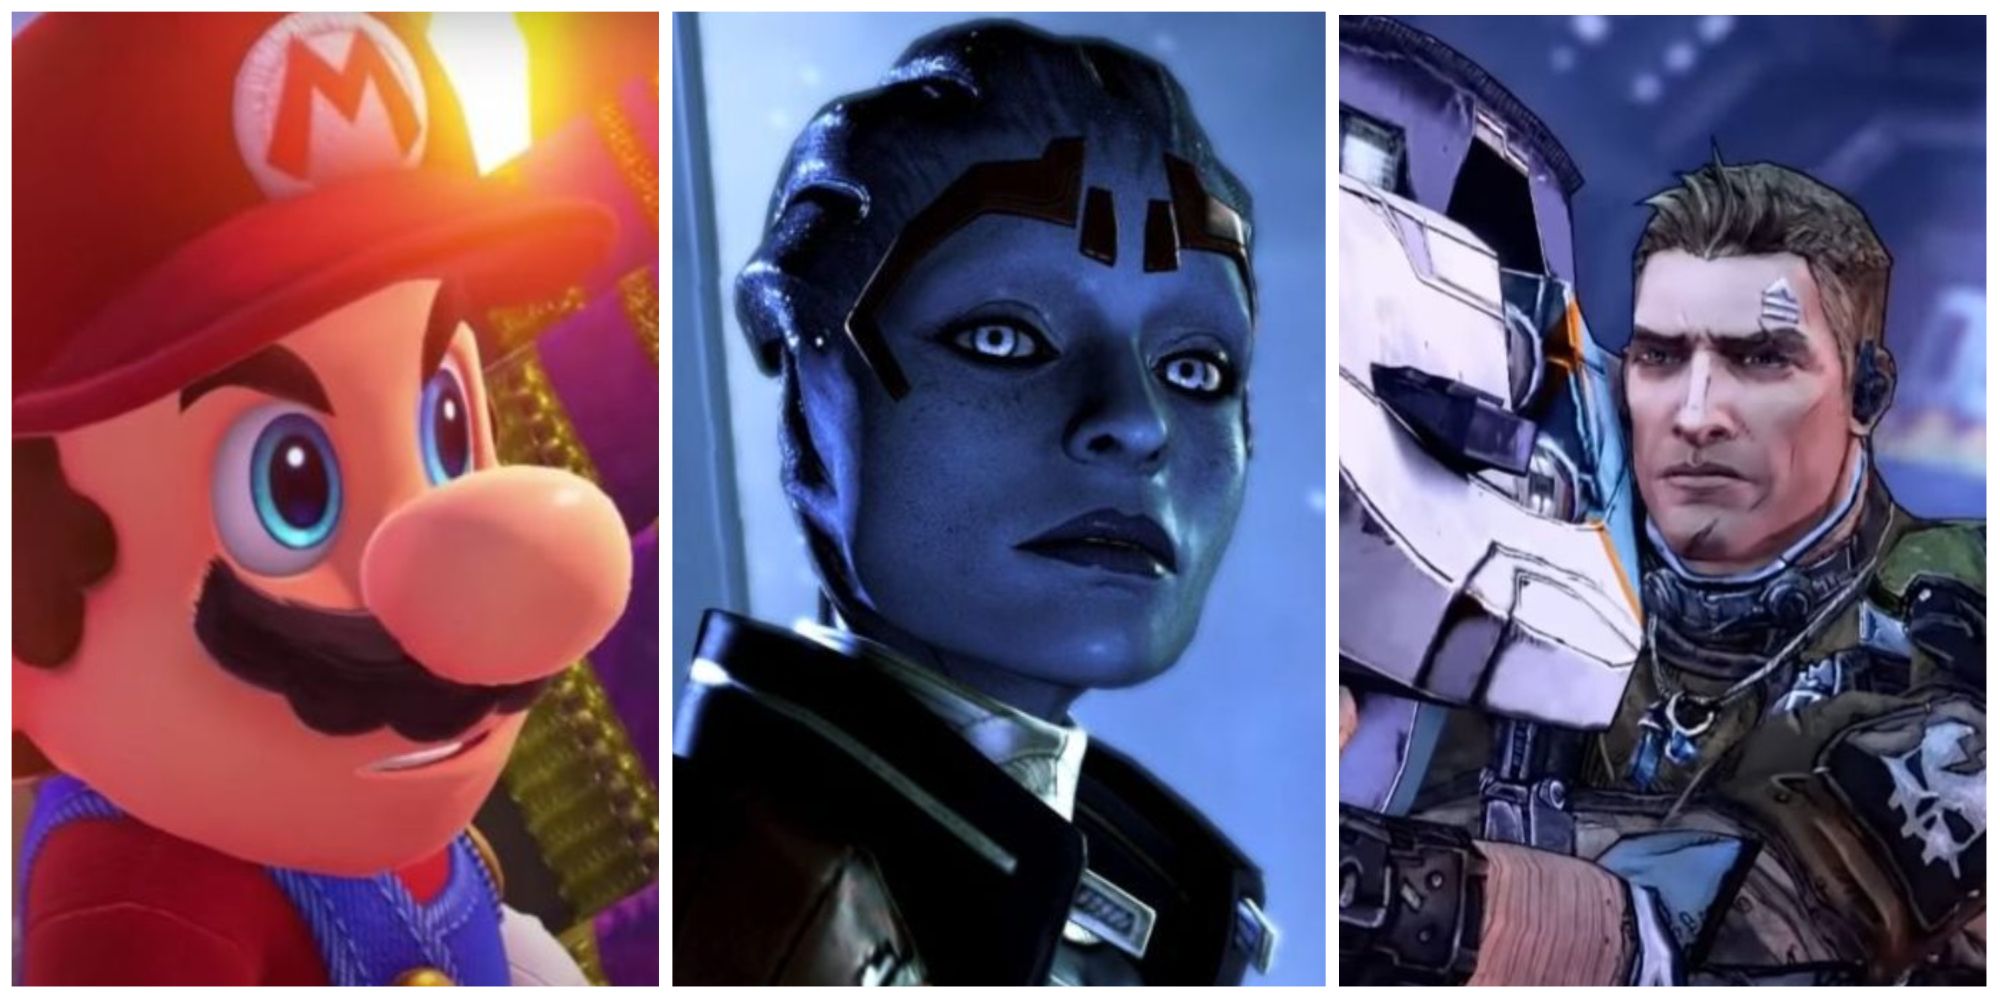 Images from the video games Mario, Mass Effect, and Borderlands 2